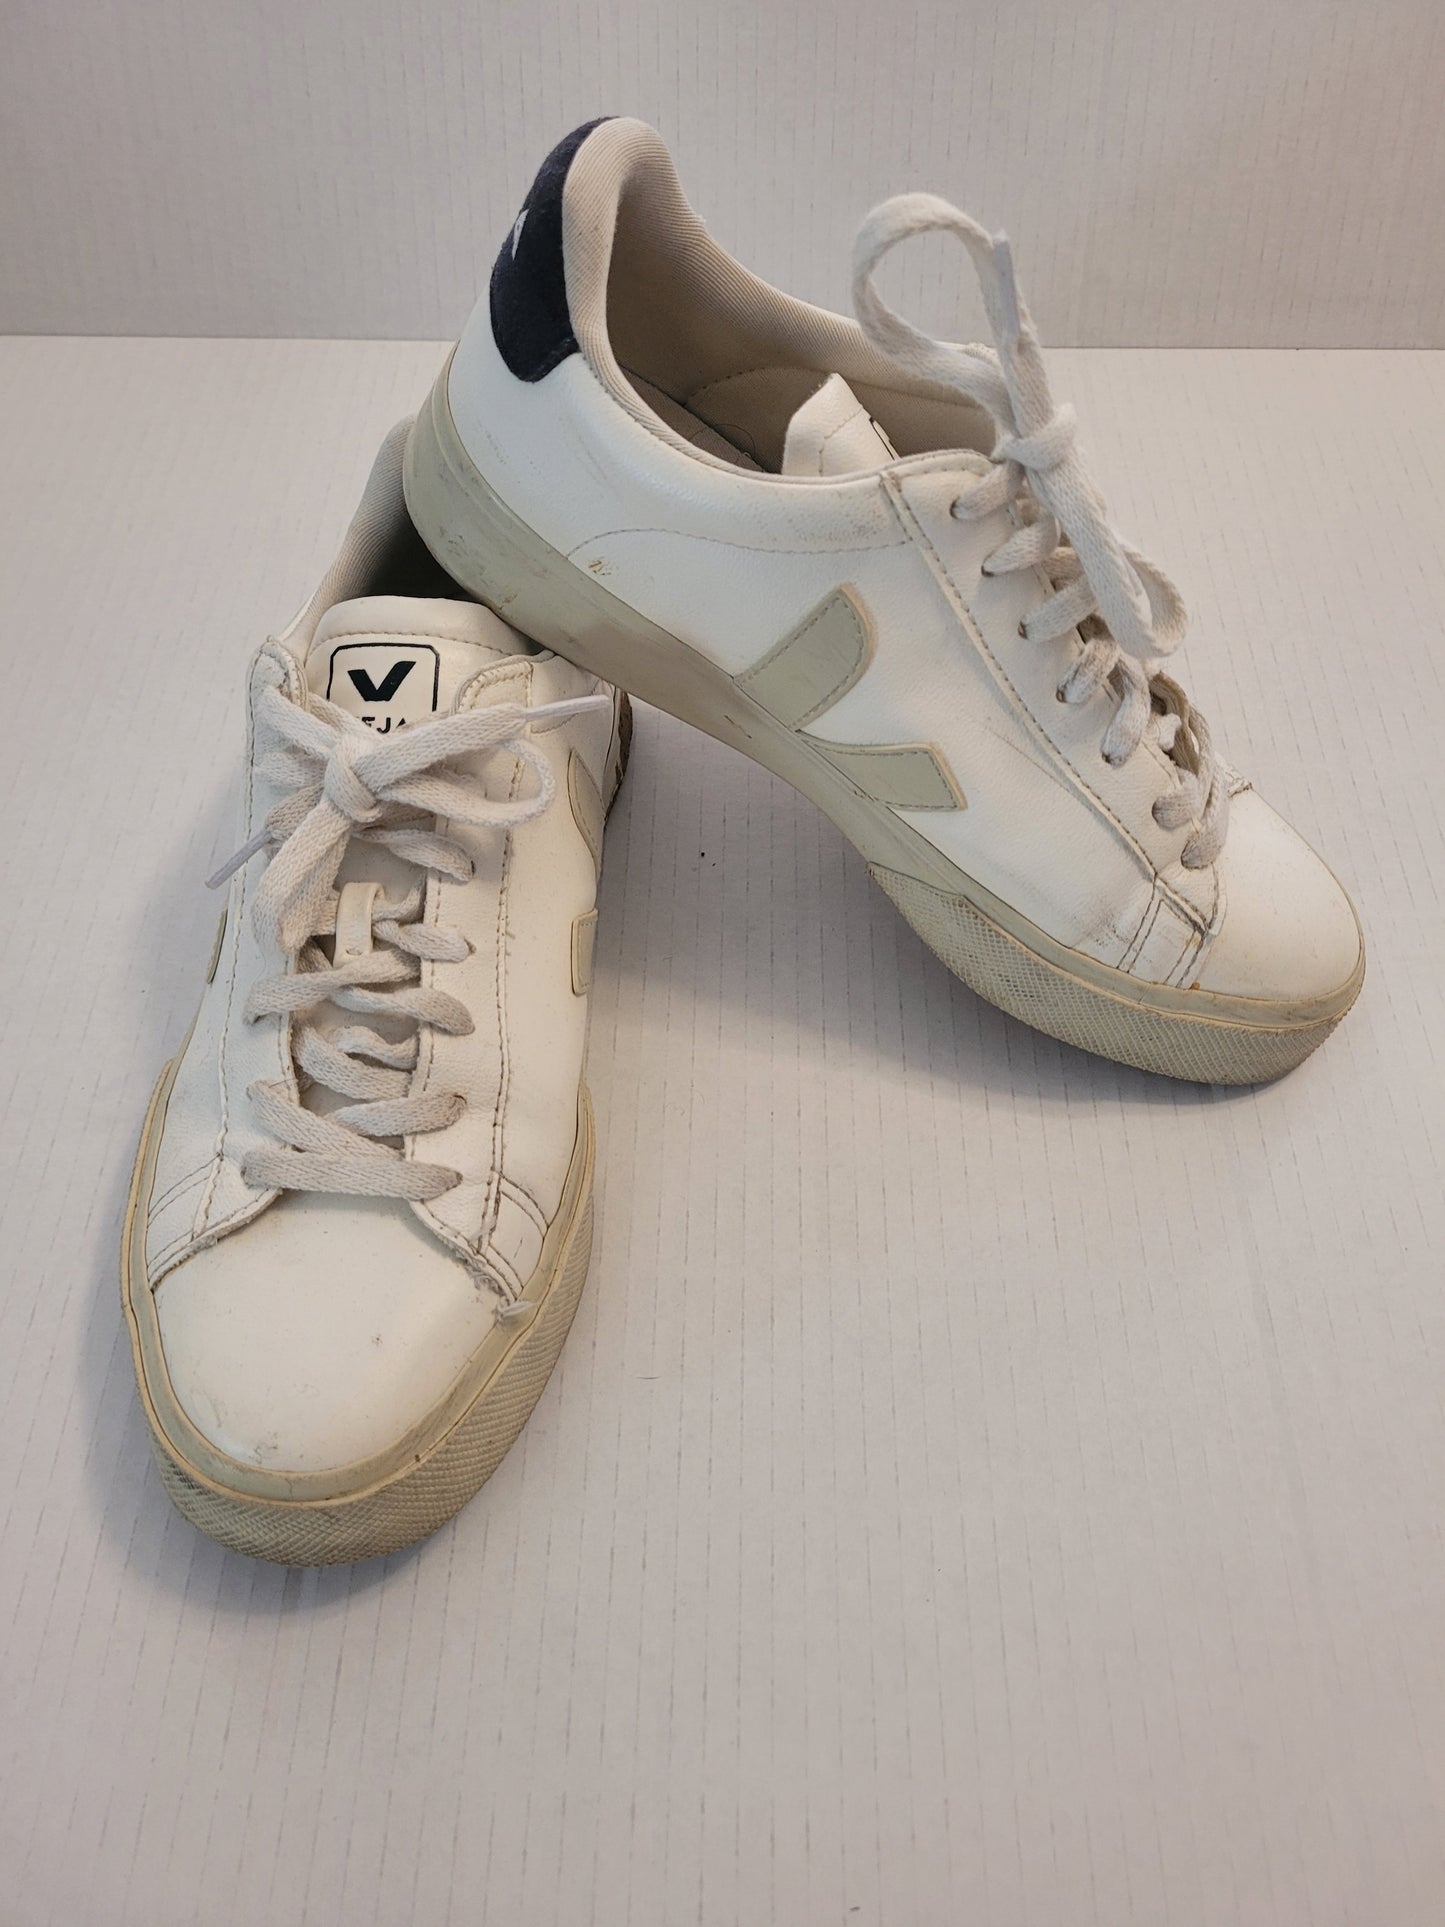 Veja Campo Women's Sneakers Size 8